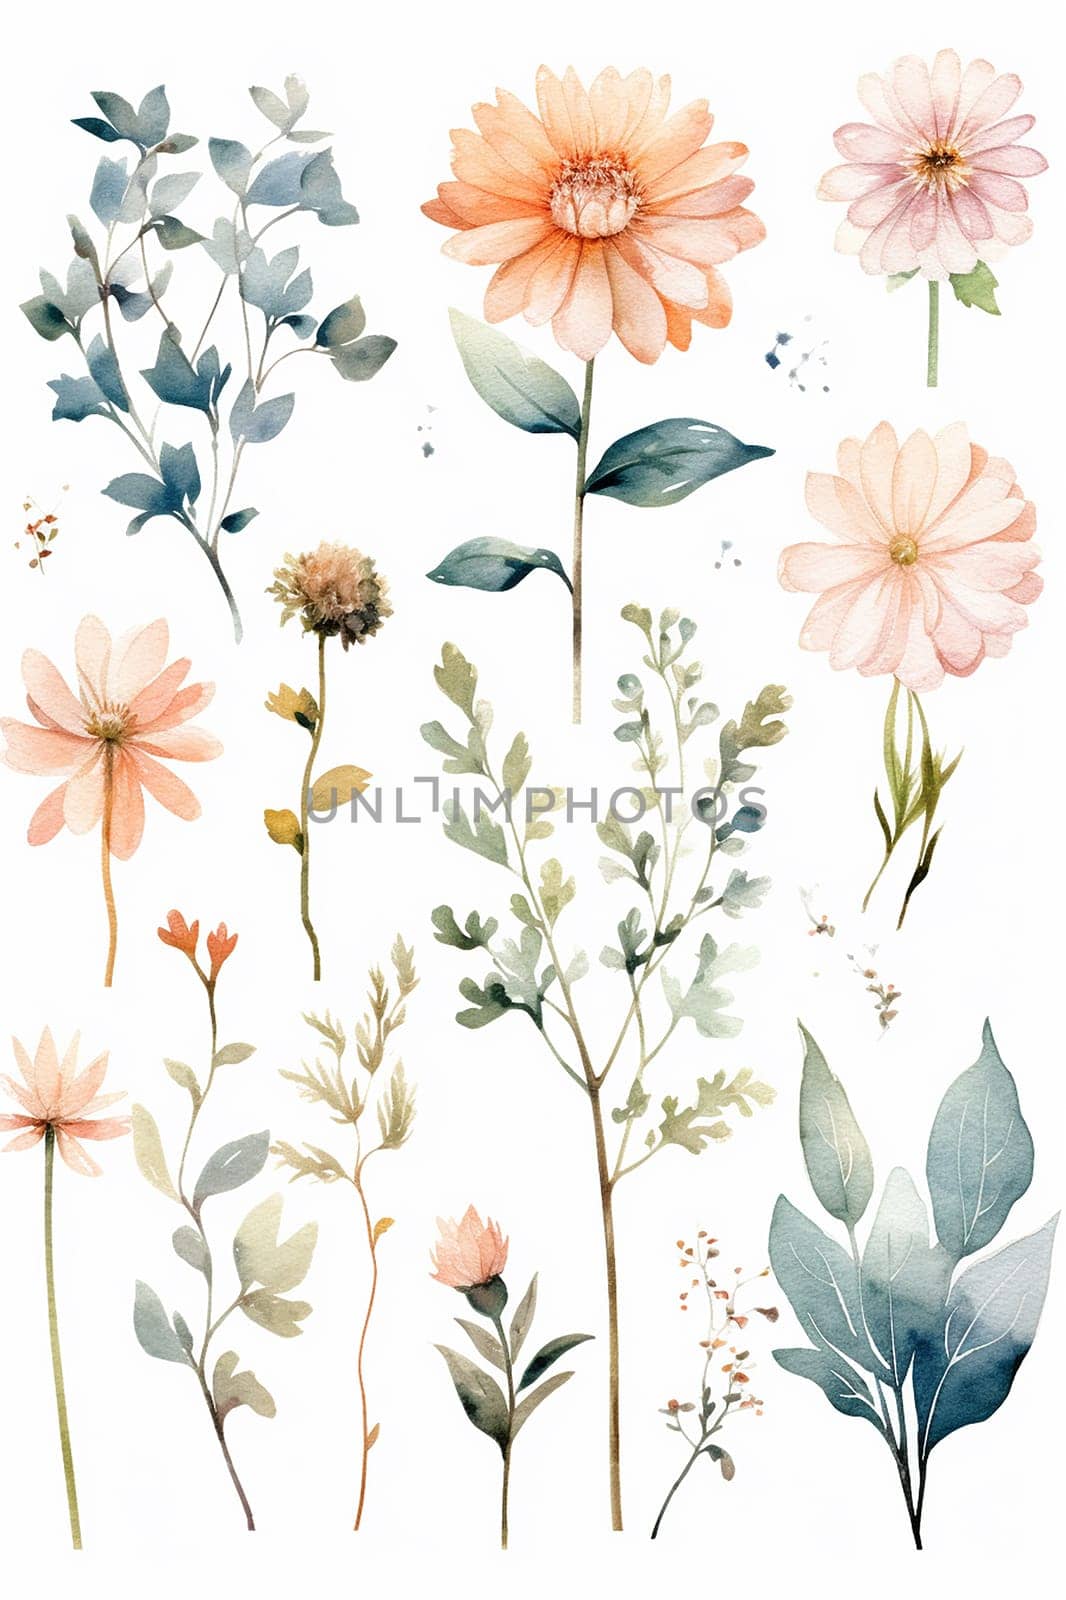 A collection of watercolor flowers and foliage in soft colors by Hype2art